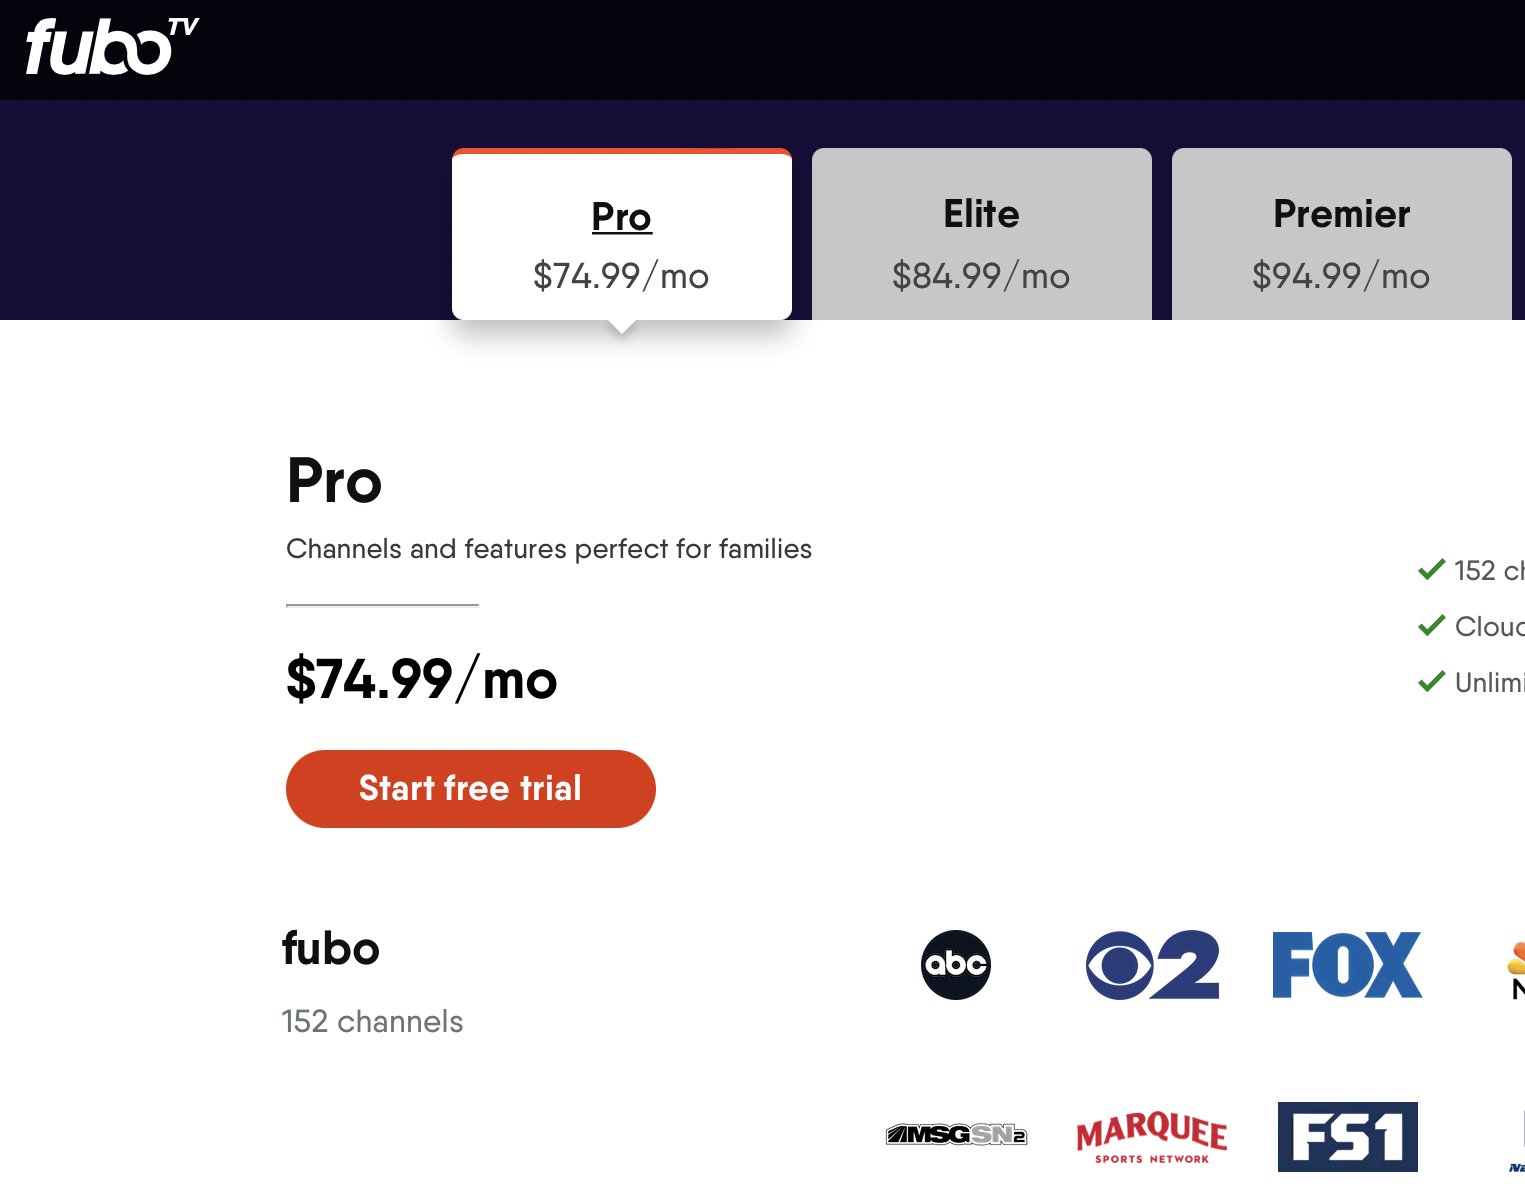 Dan Rayburn on X: fuboTV raises` pricing by $5 for new members with the  Pro plan going from $69.99 to $74.99 and the Elite plan going from $79.99  to $84.99. The Ultimate